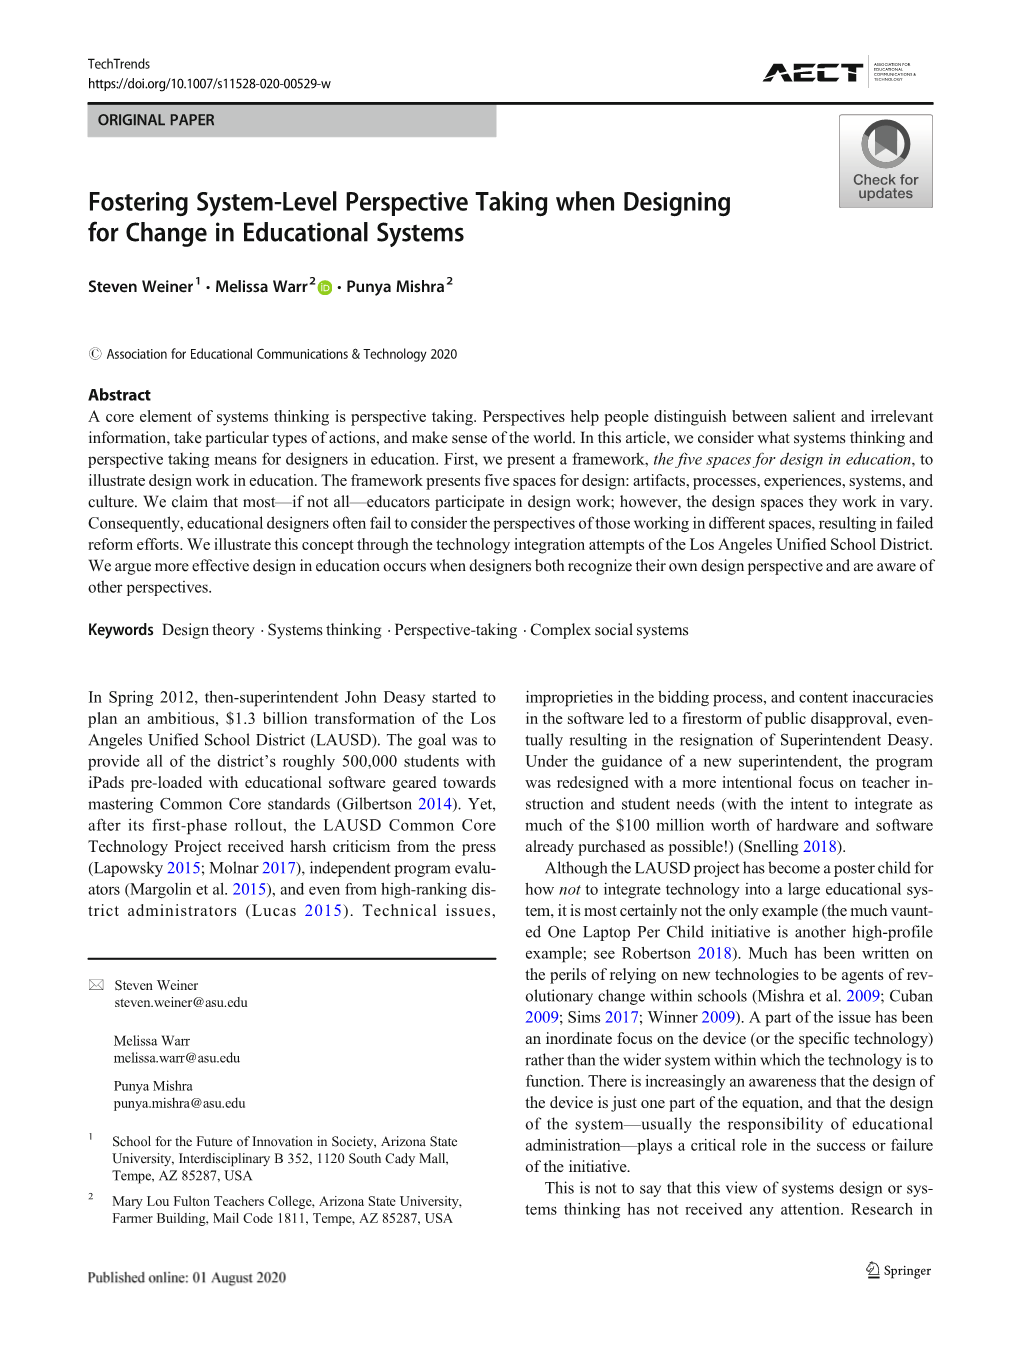 Fostering System-Level Perspective Taking When Designing for Change in Educational Systems